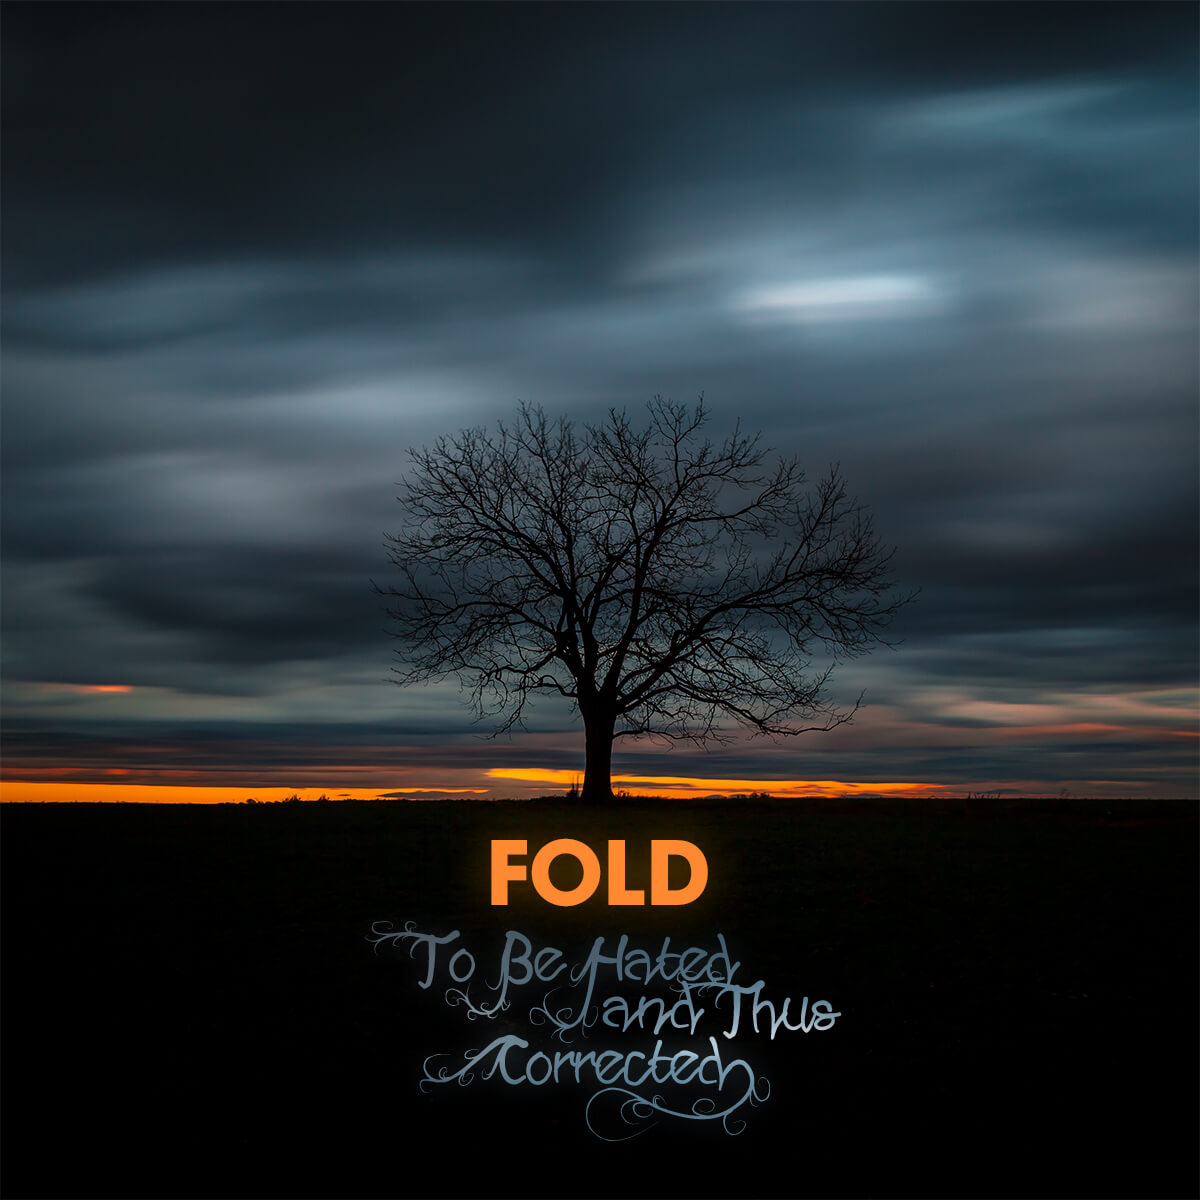 Artwork for Fold's new single To Be Hated and Thus Corrected